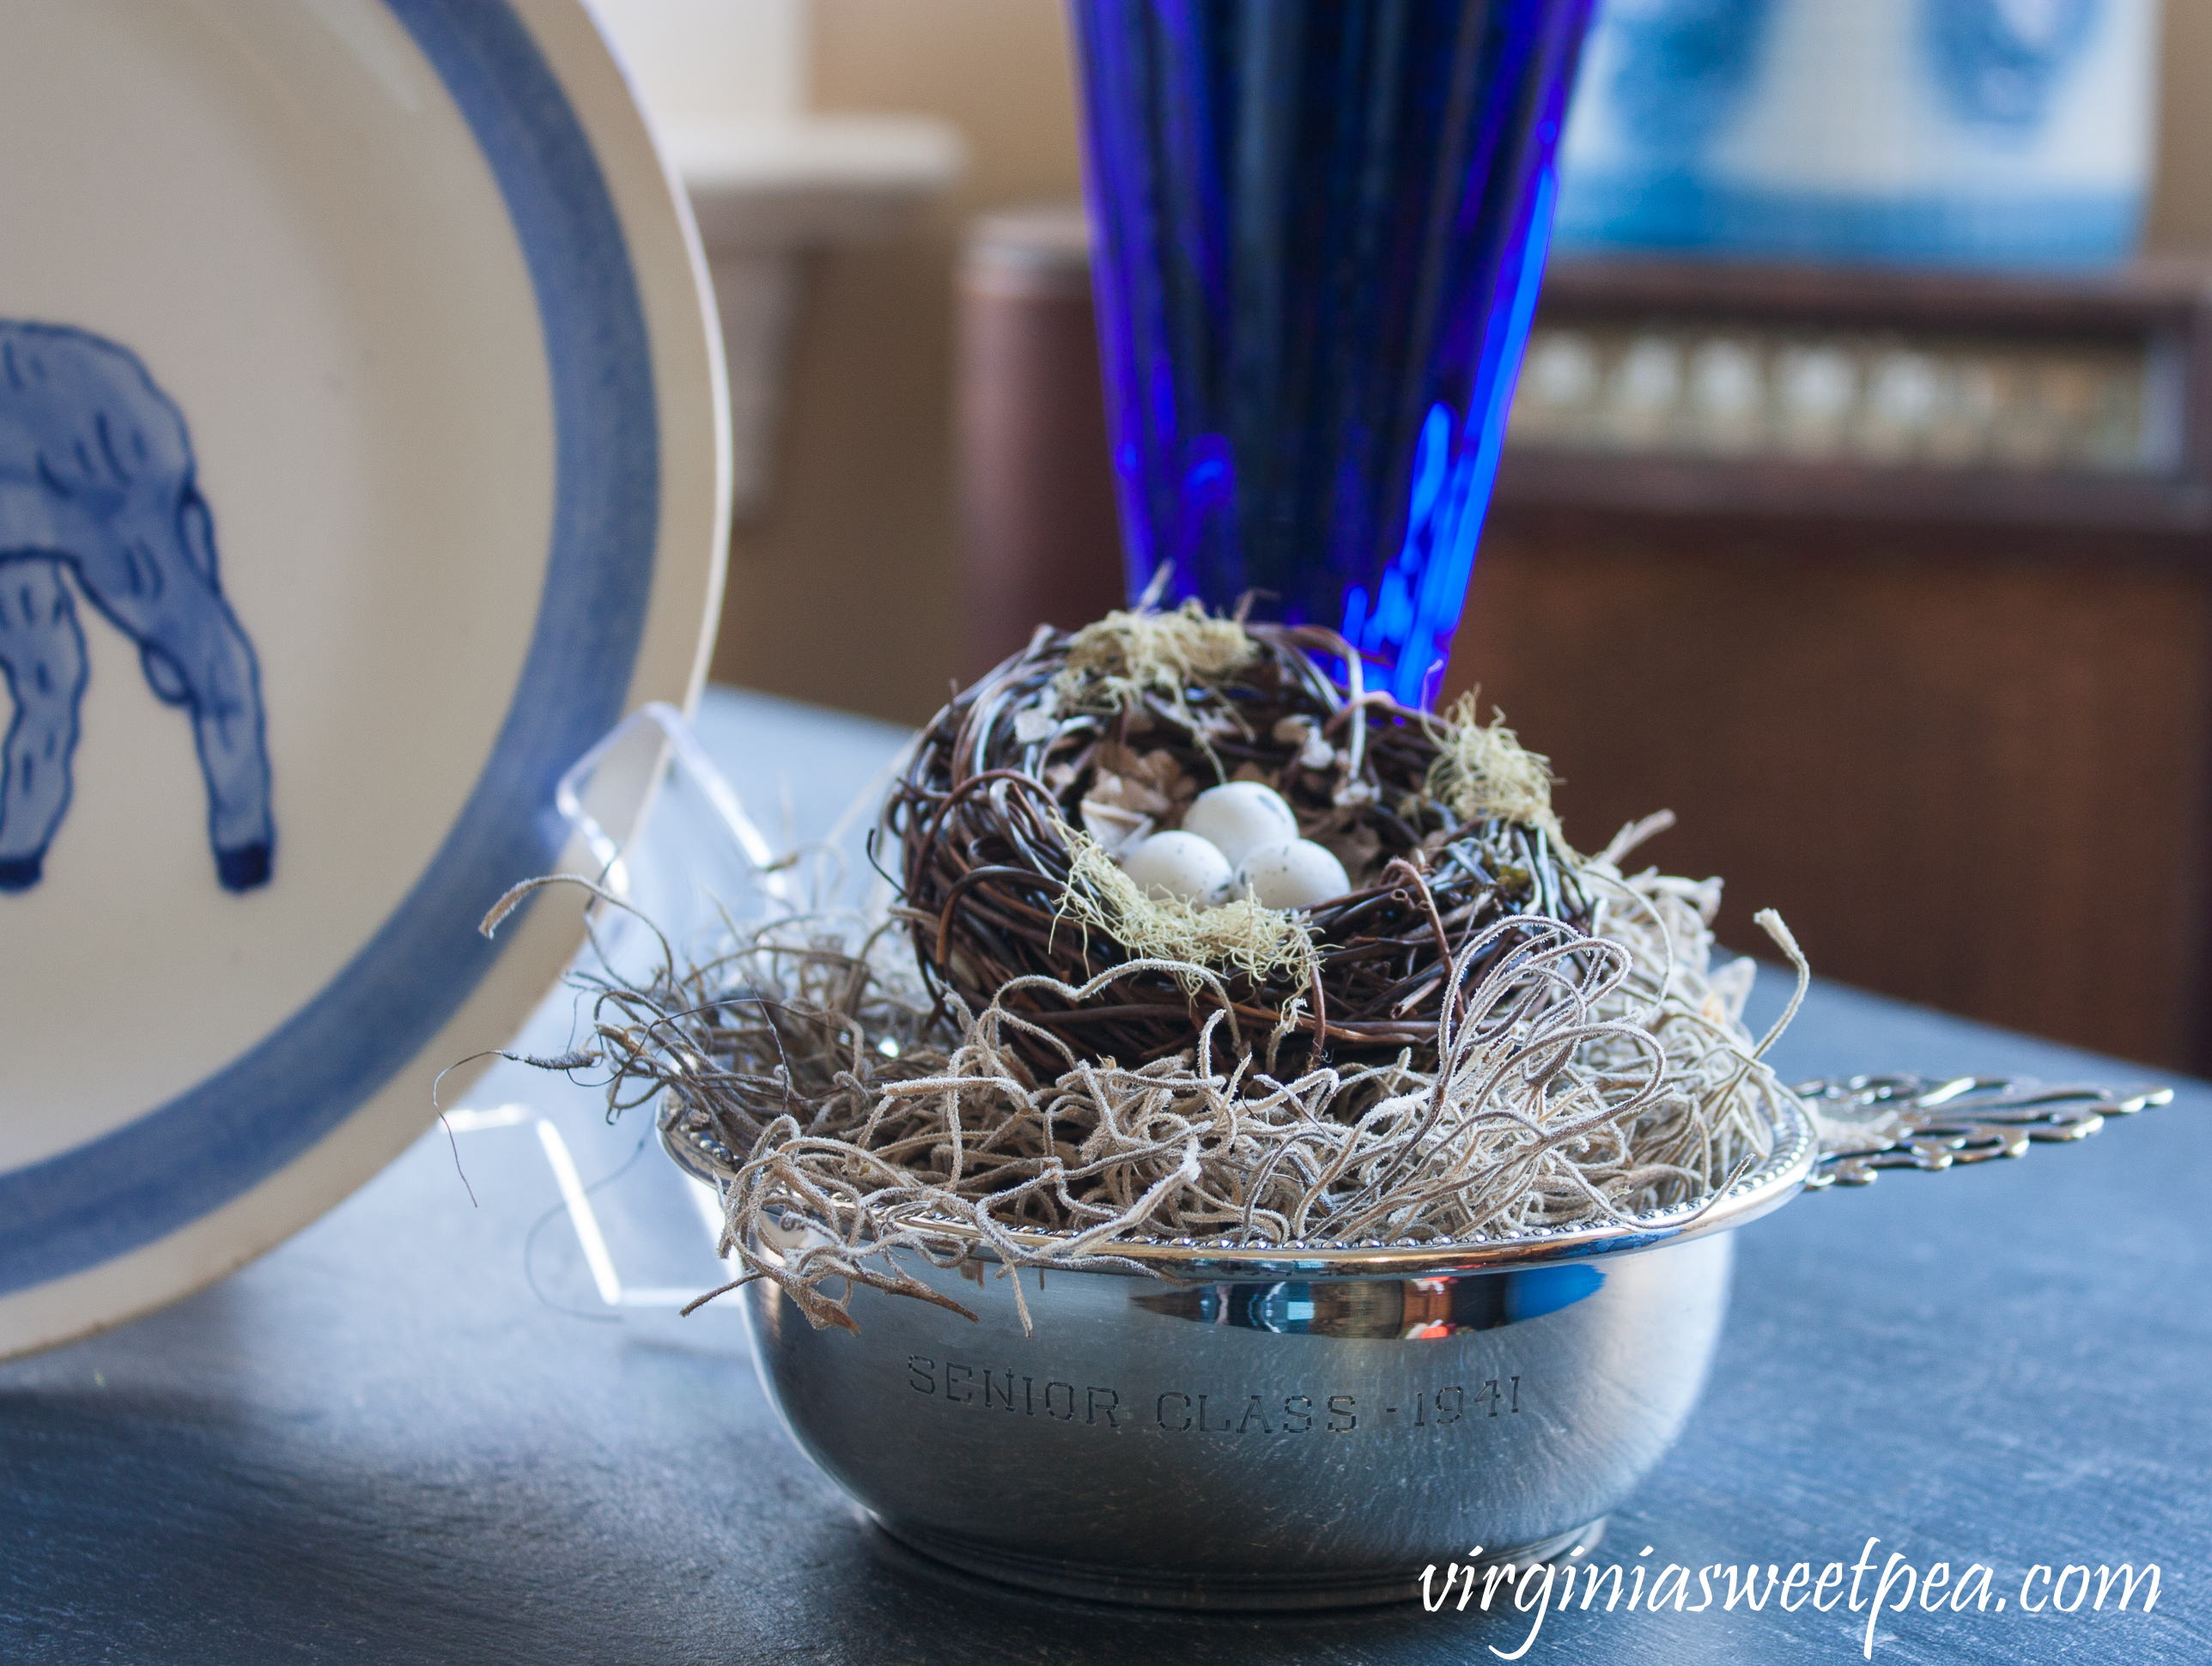 Decorating for Easter with Vintage - 1941 silver child's porridge bowl with a nest